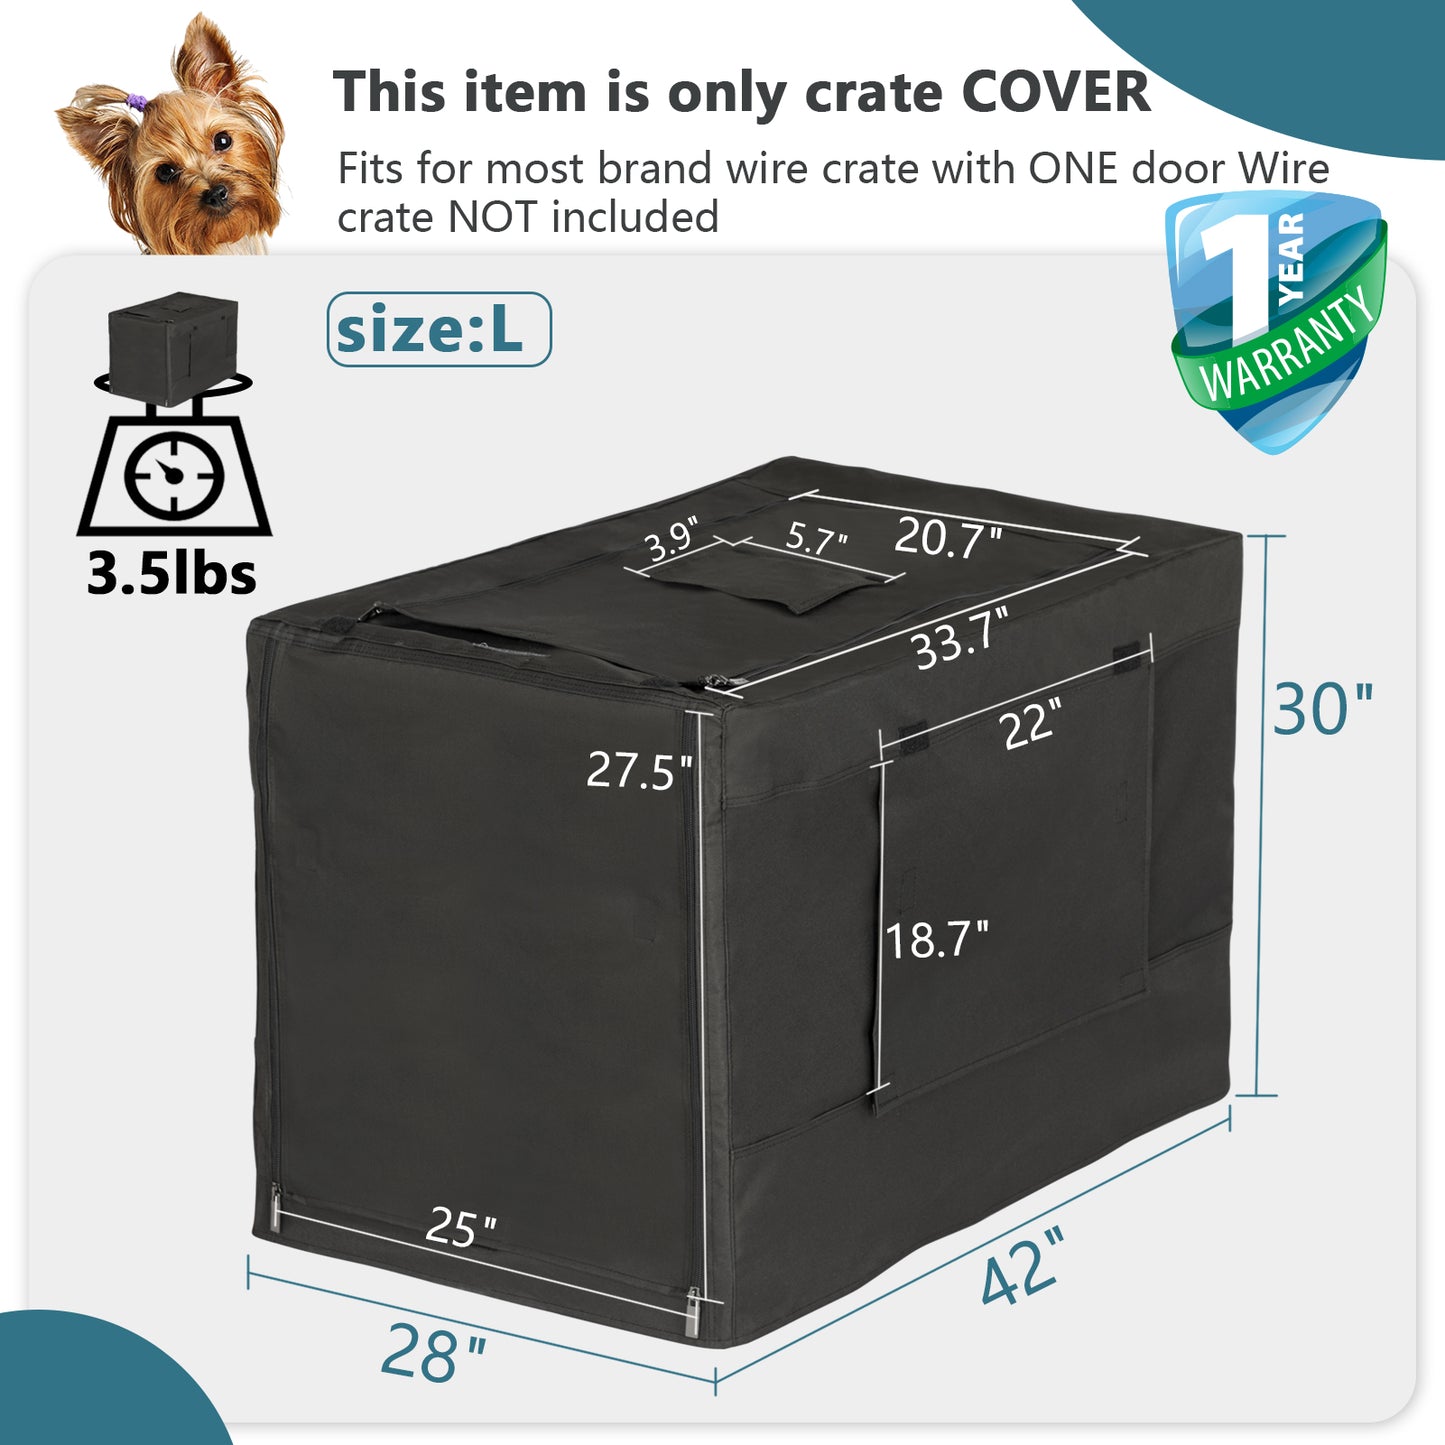 Petsfit-Dog-Crate-Cover-04